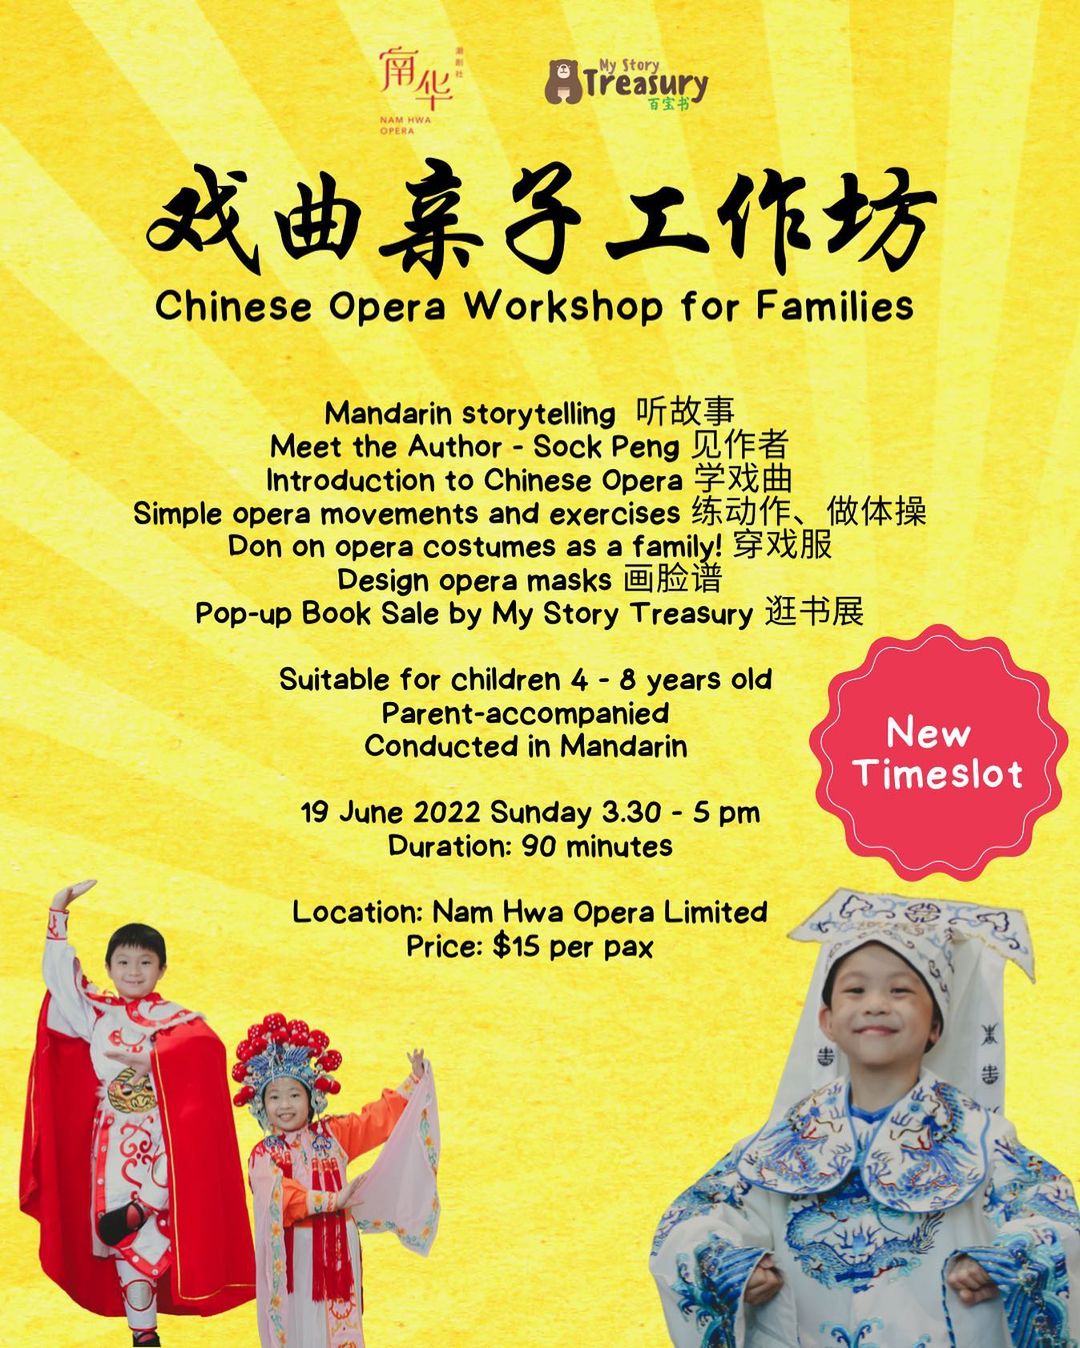 [SOLD OUT - NEW TIMESLOT] 戏曲亲子工作坊 Chinese Opera Workshop for Families